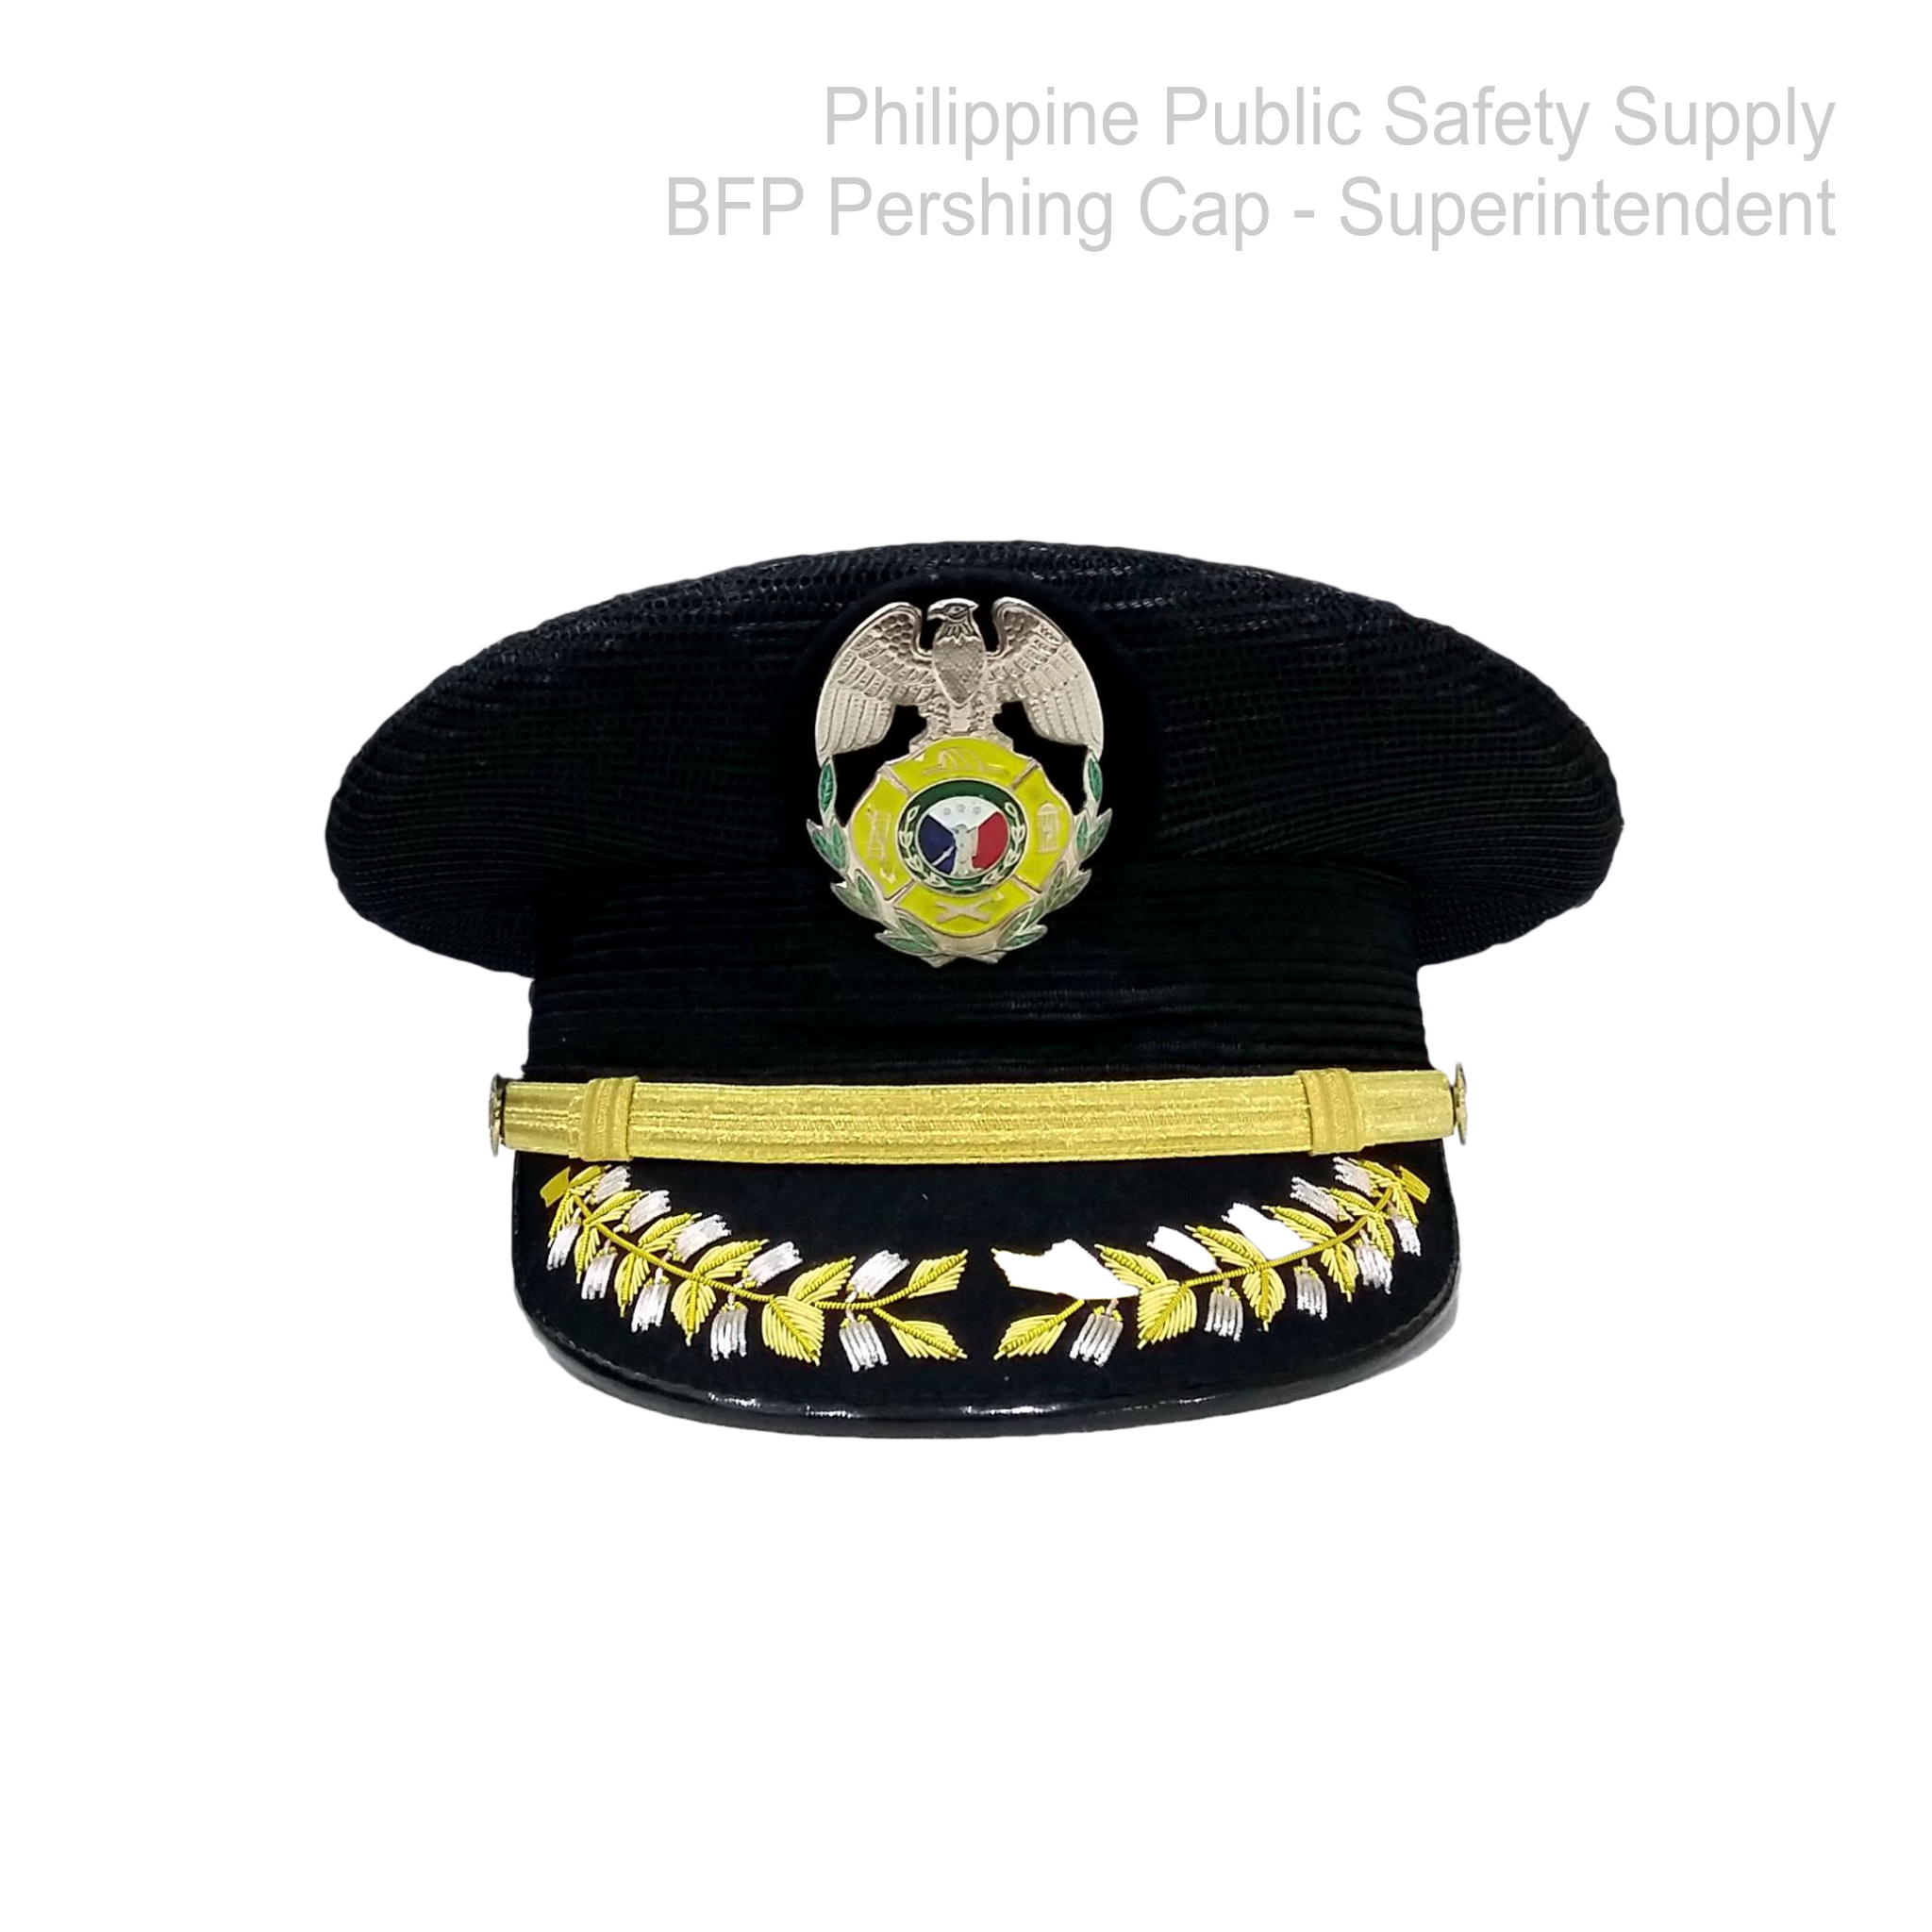 Bureau Of Fire Protection (BFP) Pershing Cap Superintendent - BFP